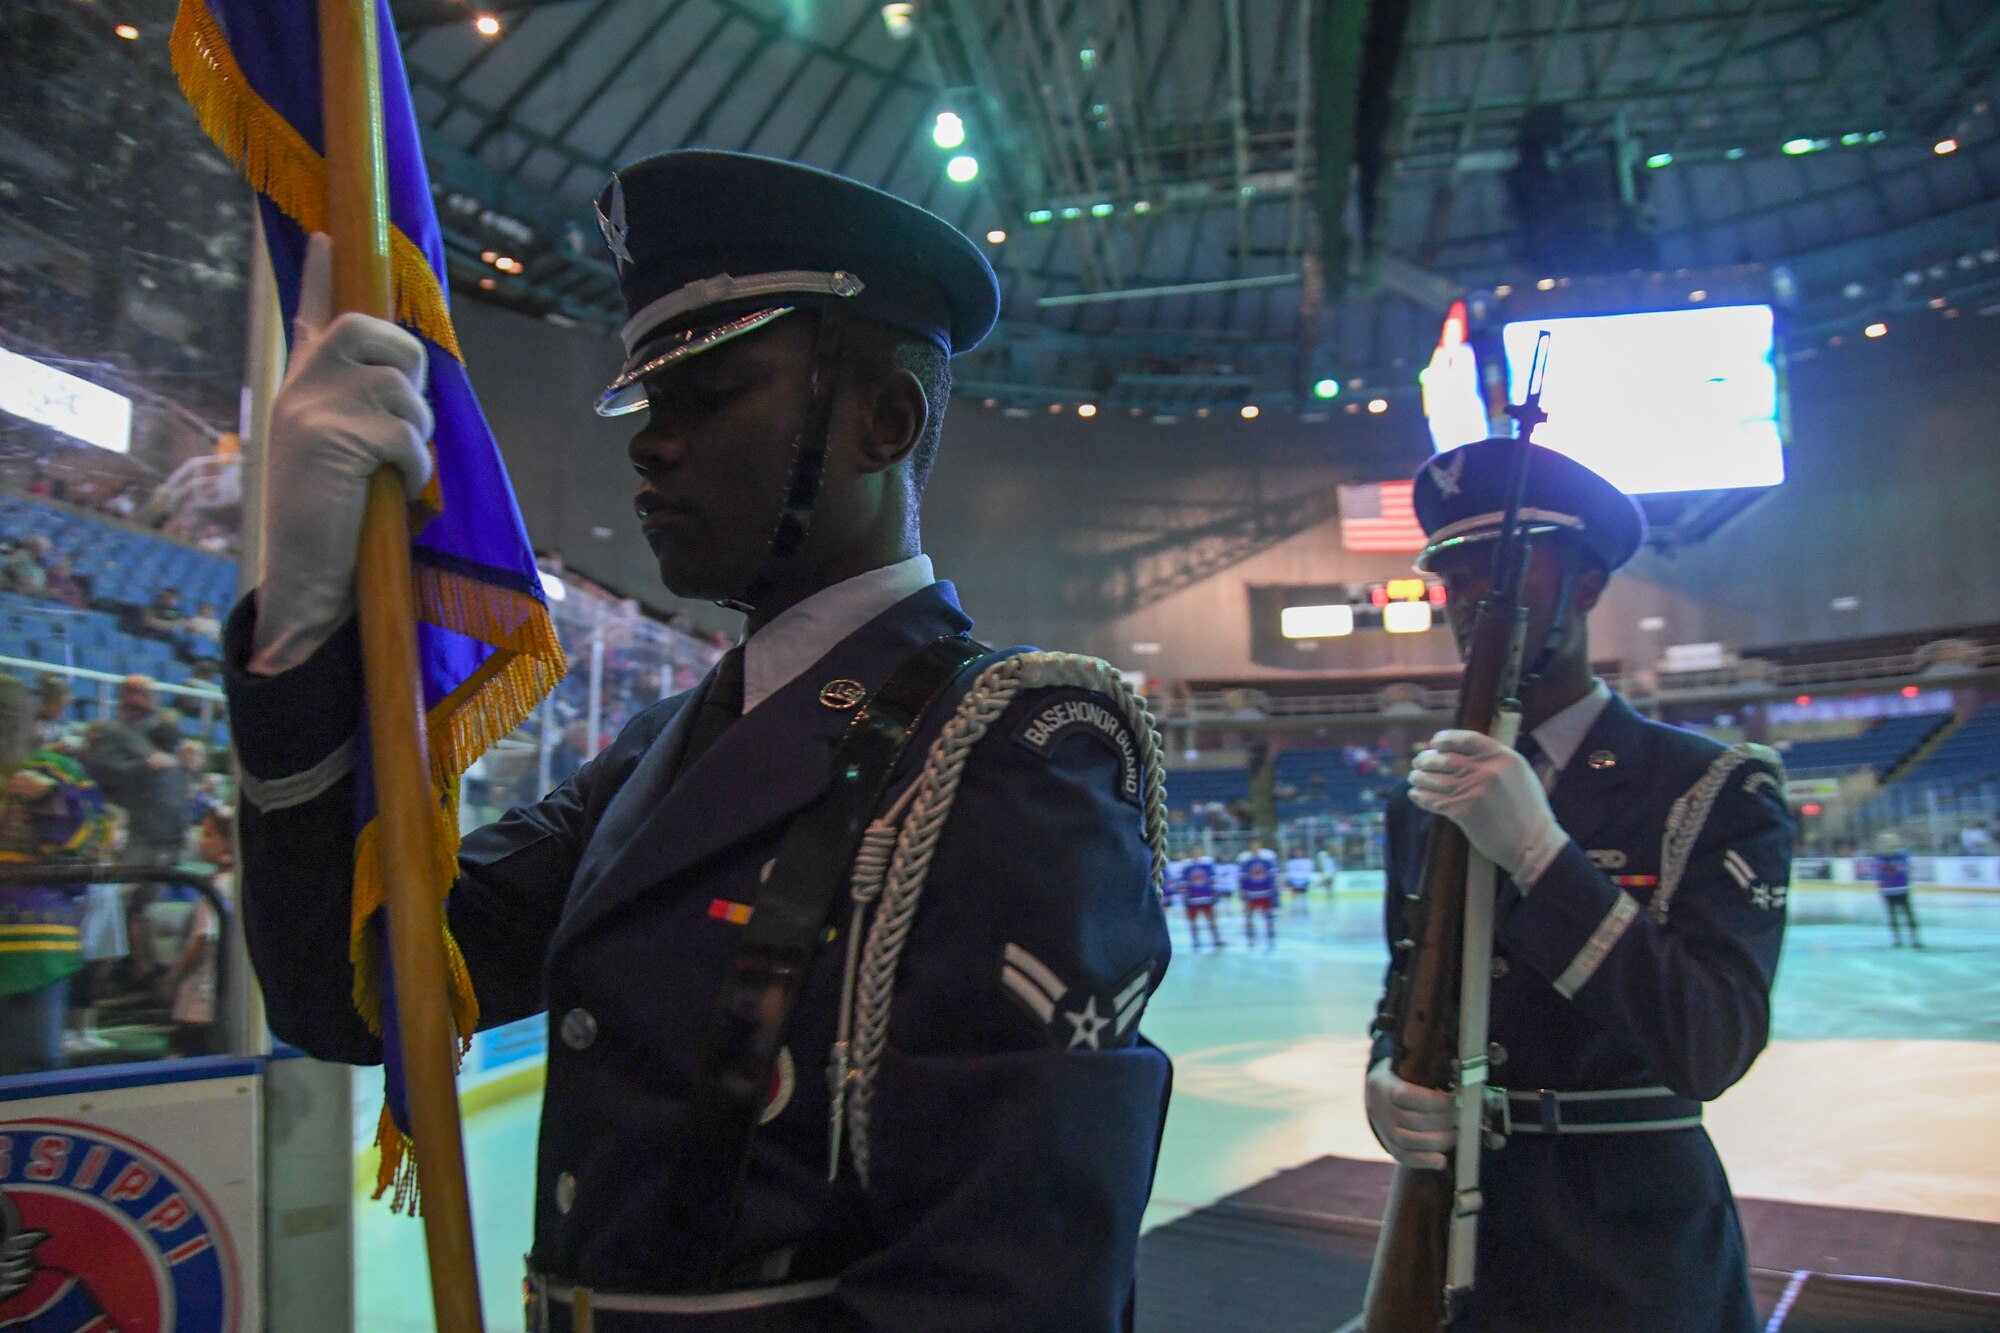 Keesler Air Force Base Honor Guard members exit the ice rink during the Biloxi Pro Hockey game inside the Mississippi Coast Coliseum at Biloxi, Mississippi, March 3, 2023.